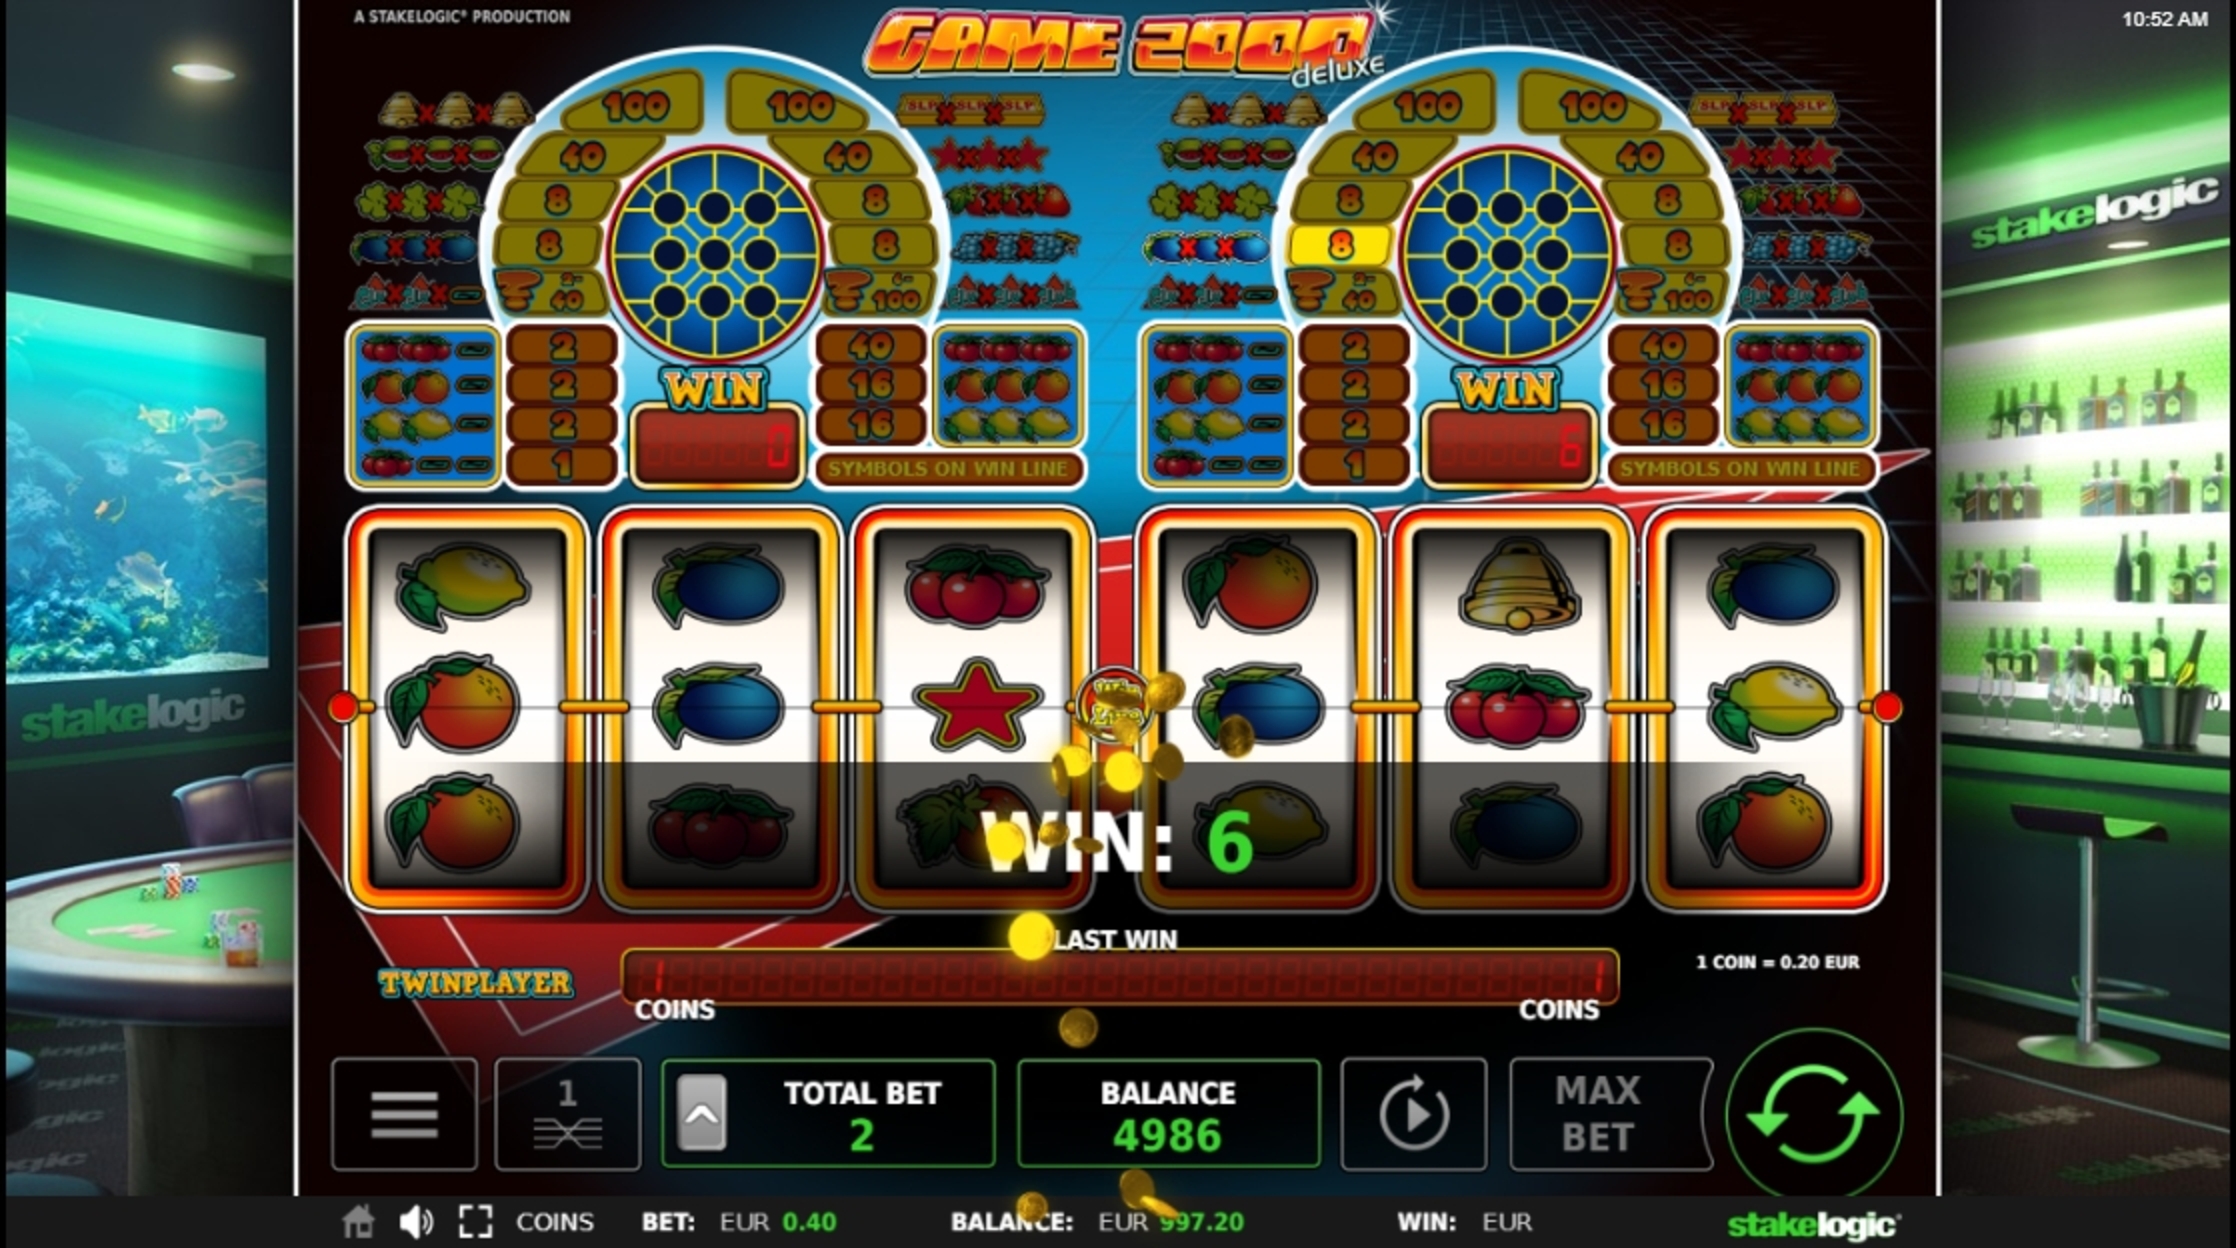 Win Money in Game 2000 Free Slot Game by Stakelogic